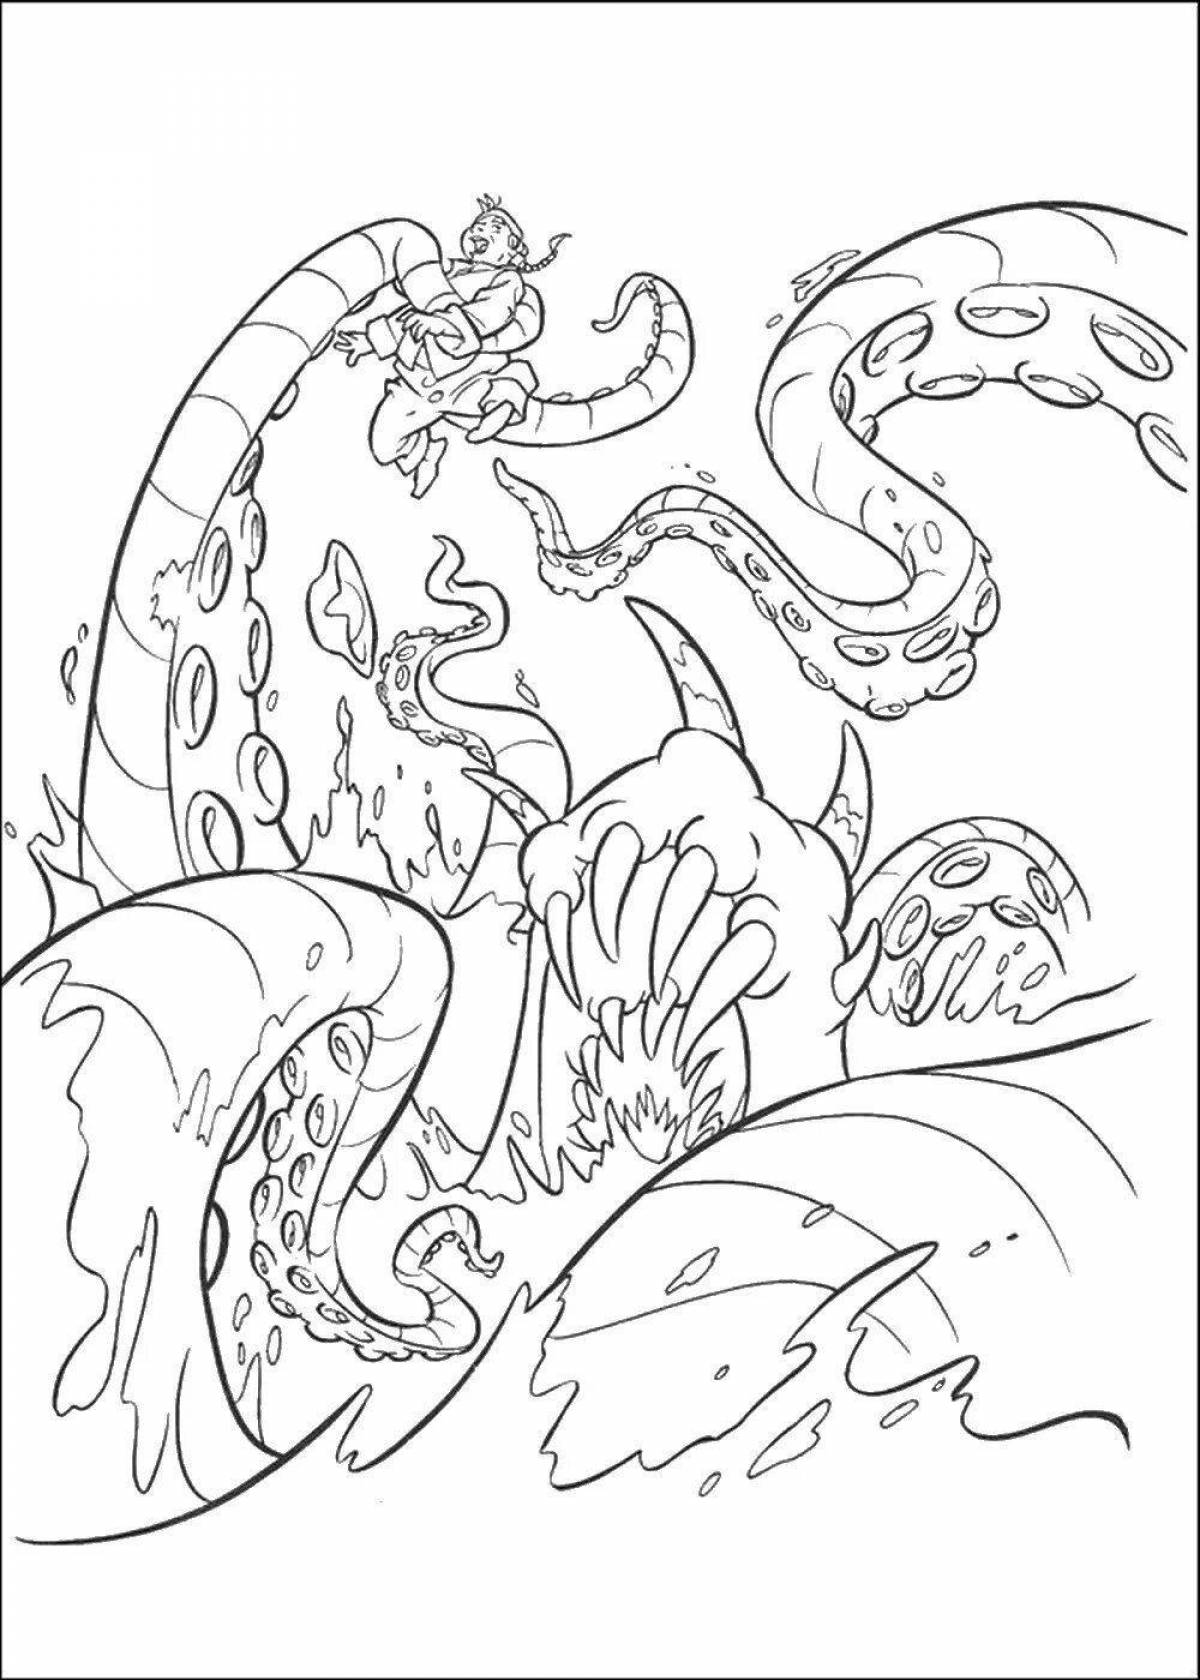 Coloring page exciting sea monster